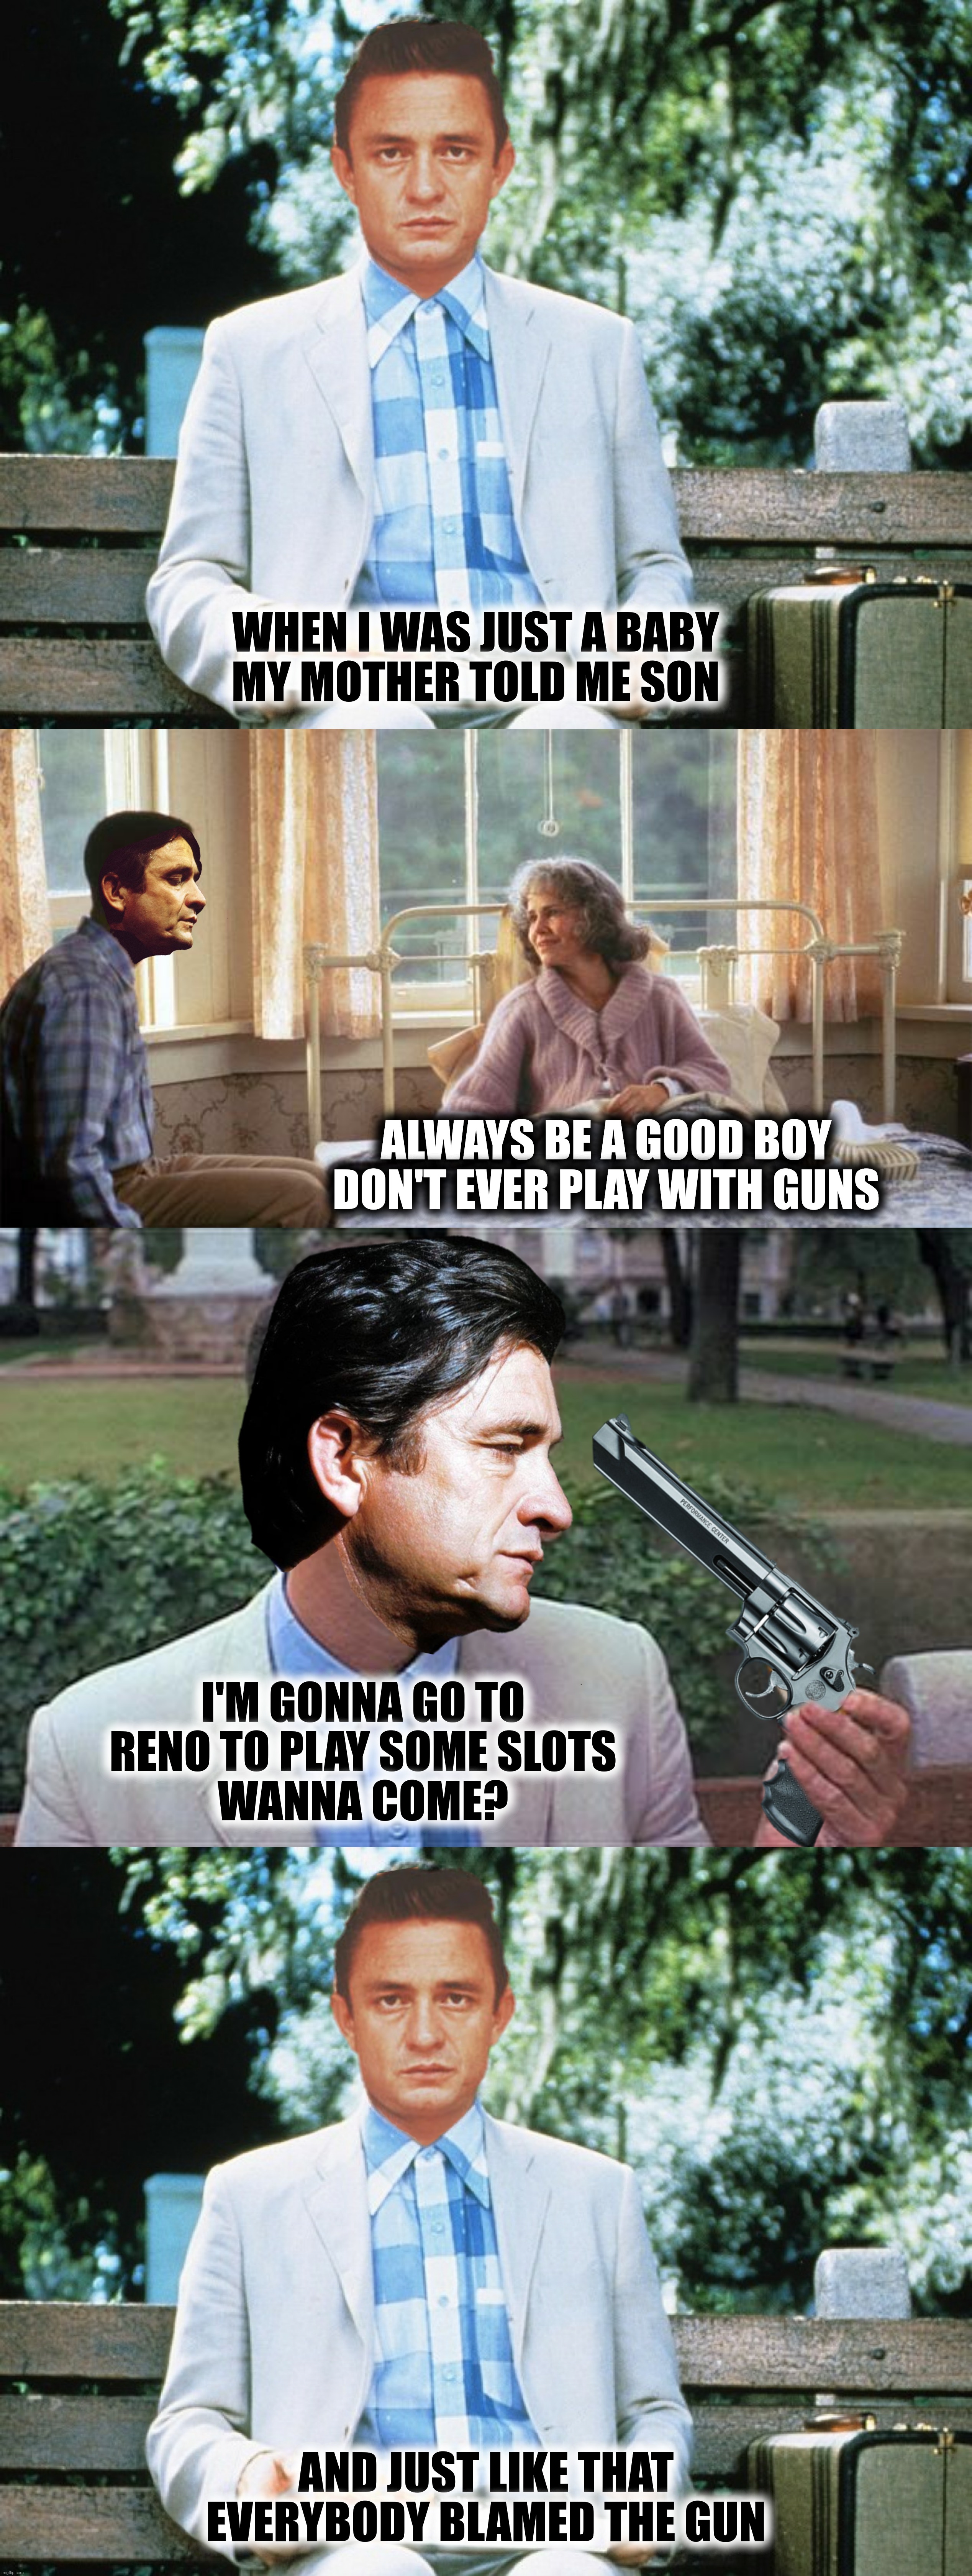 WHEN I WAS JUST A BABY
MY MOTHER TOLD ME SON ALWAYS BE A GOOD BOY
DON'T EVER PLAY WITH GUNS I'M GONNA GO TO RENO TO PLAY SOME SLOTS
WANNA CO | made w/ Imgflip meme maker